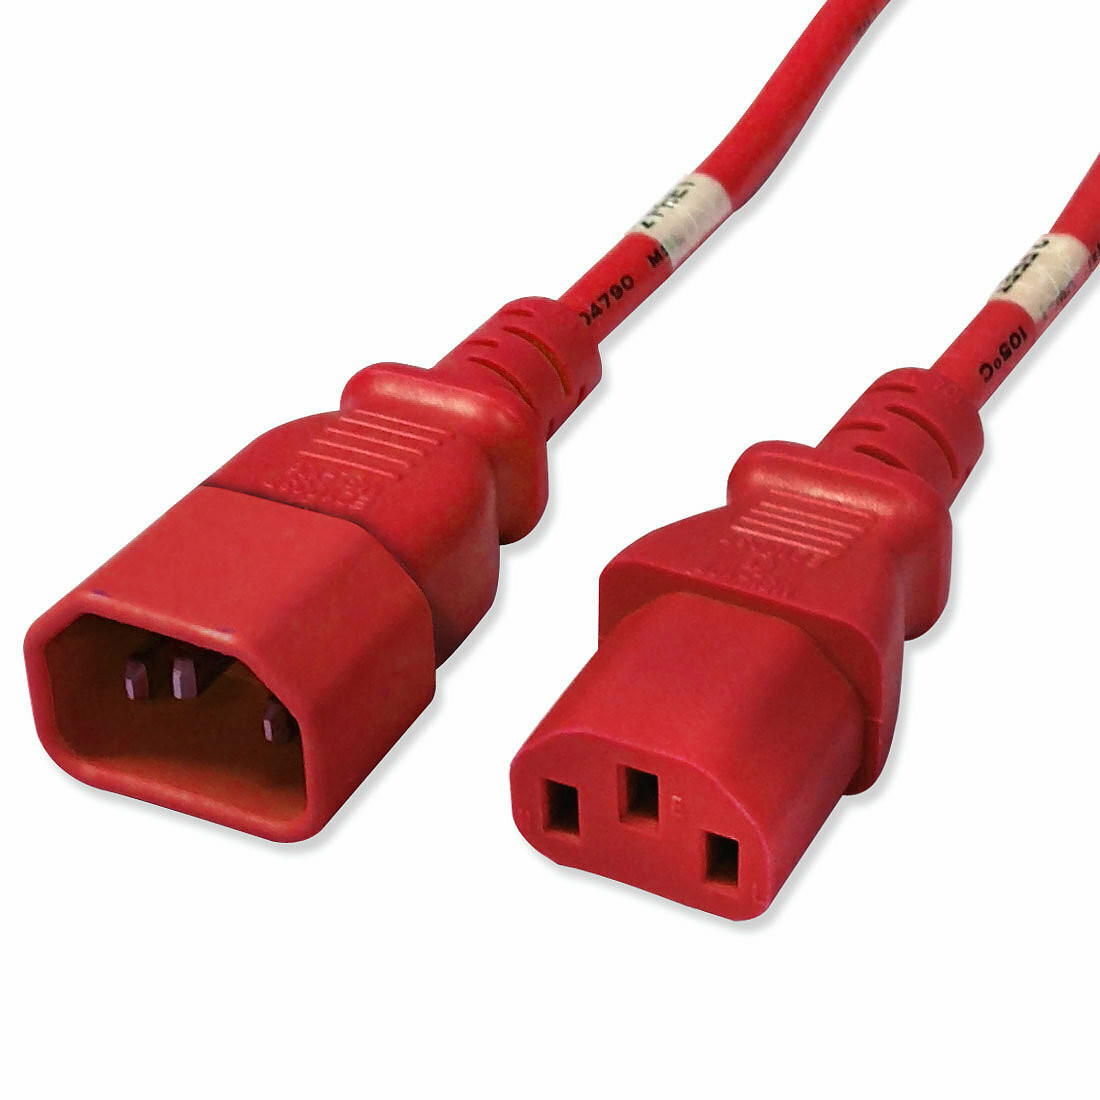 Power Cord, C14 to C13, 18/3 AWG, 10Amp, 250V SVT Jacket, Red, 2.5 Foot